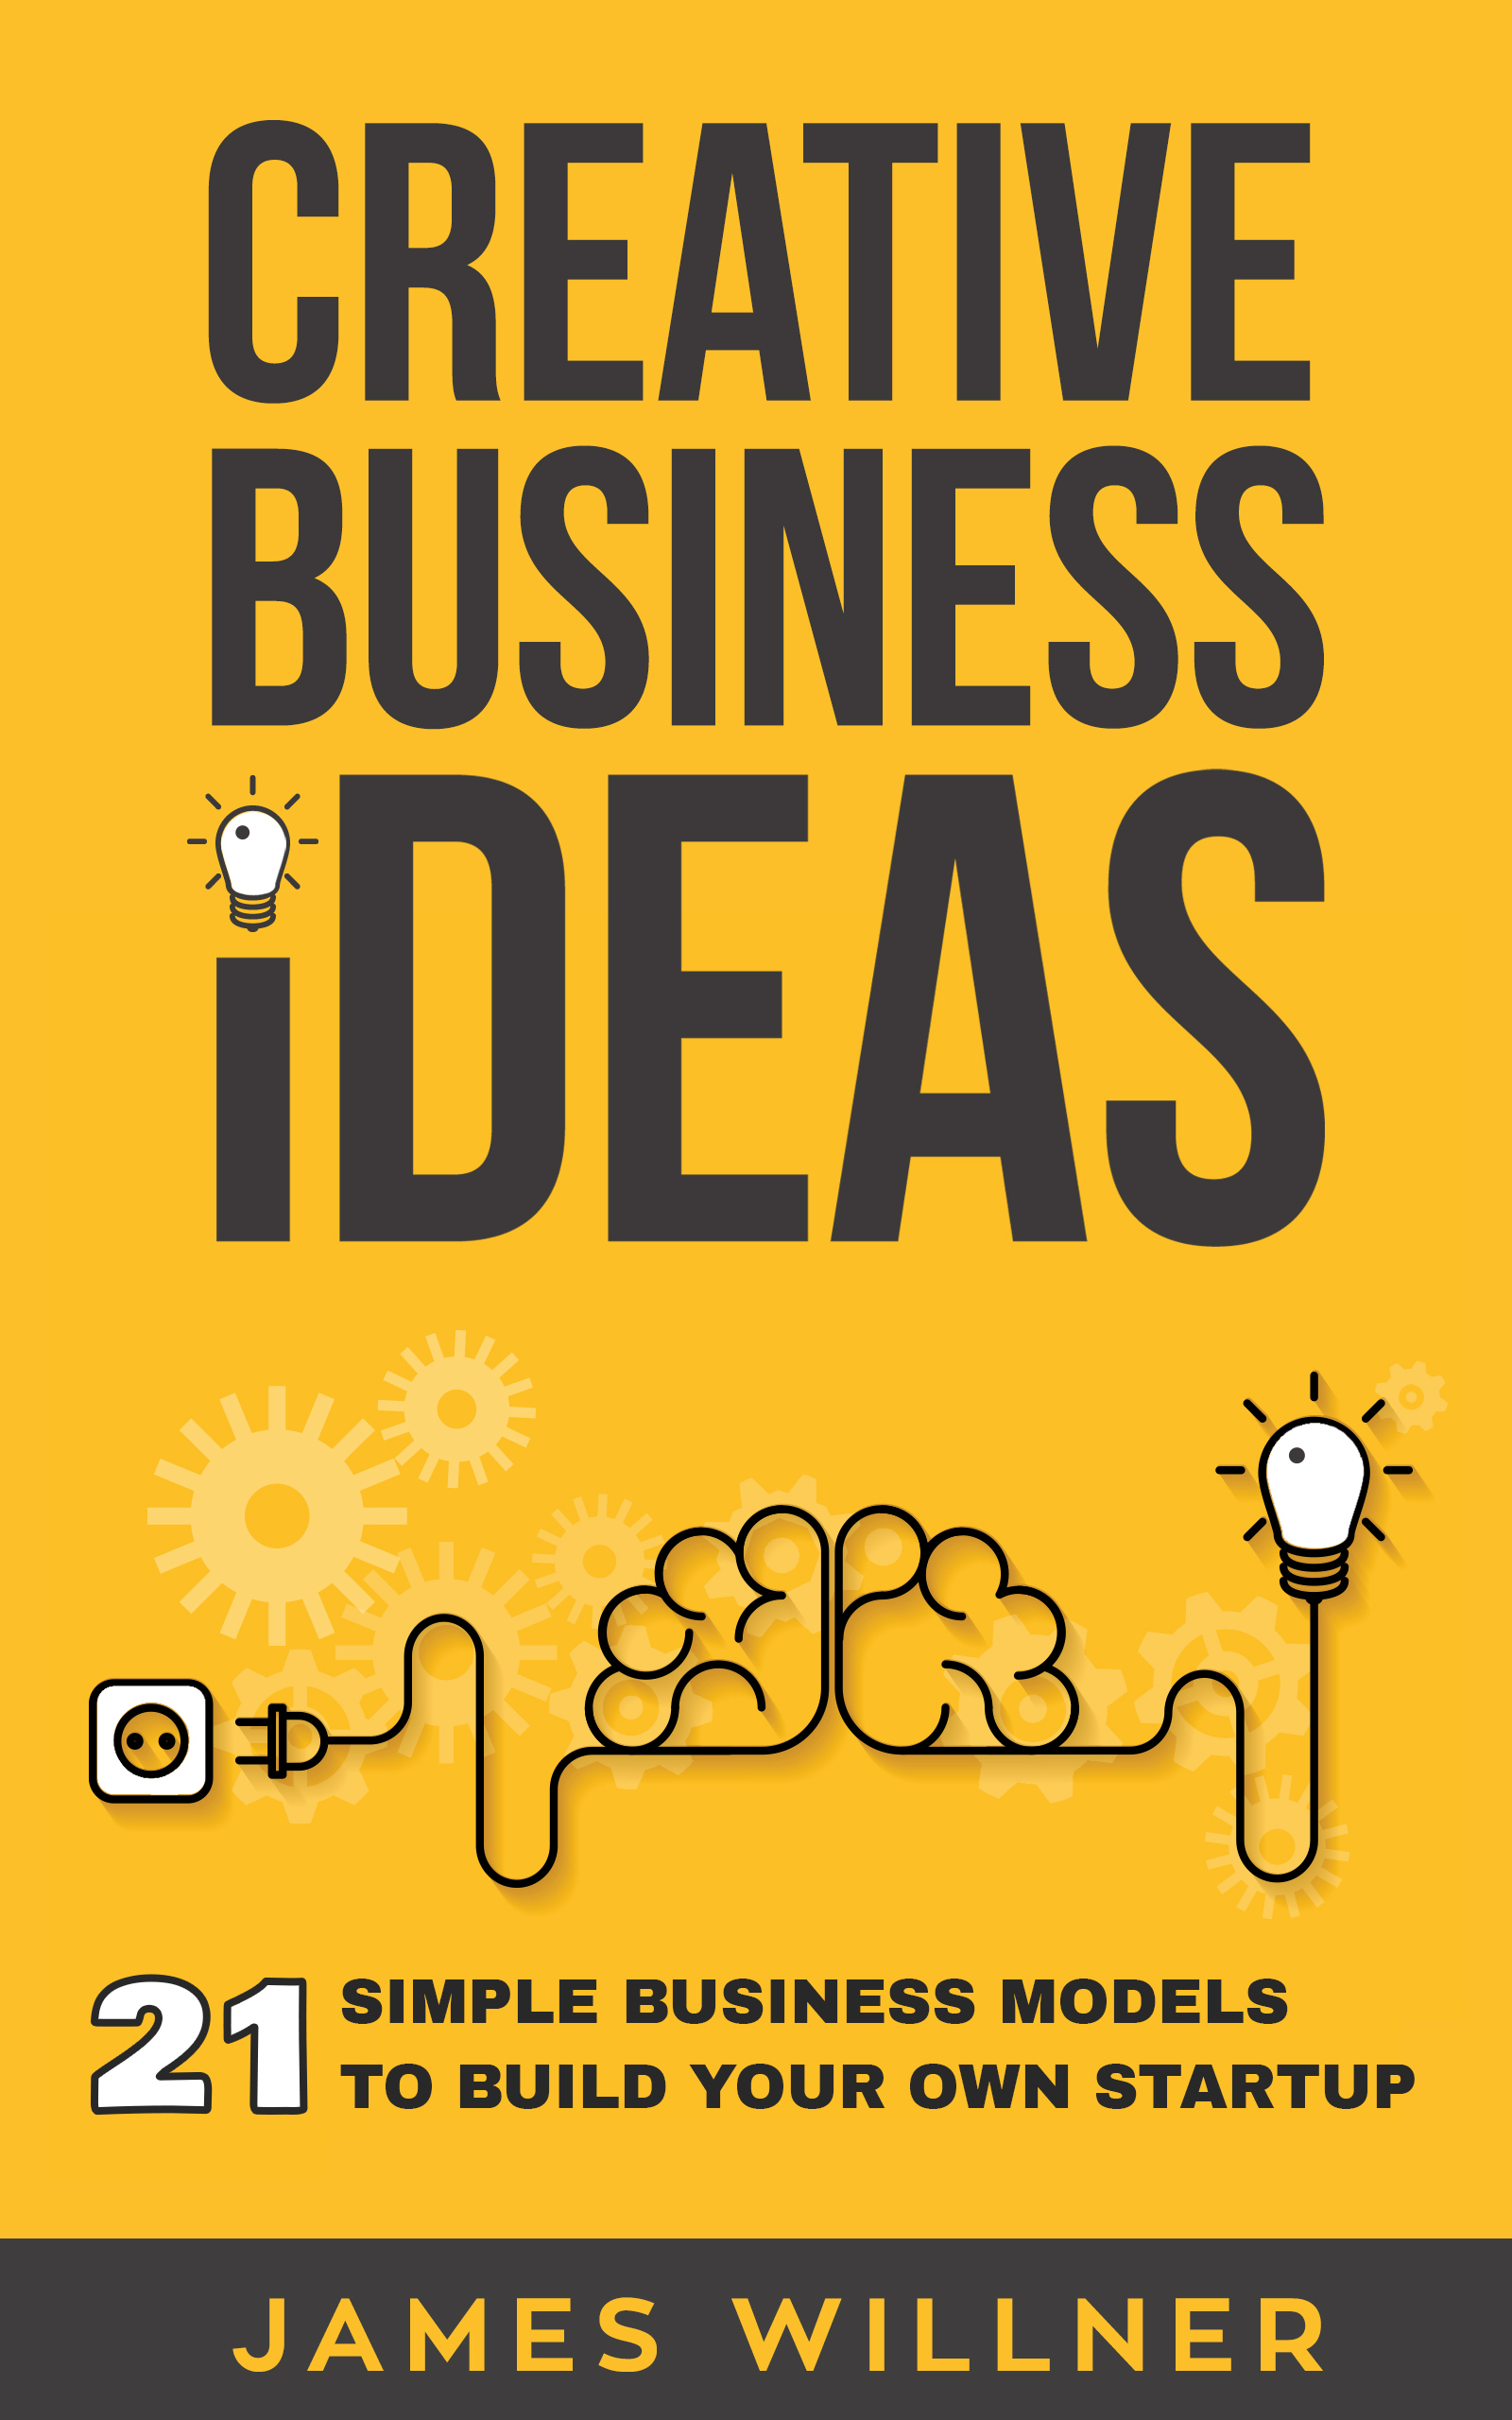 FREE: Creative Business Ideas by James Willner